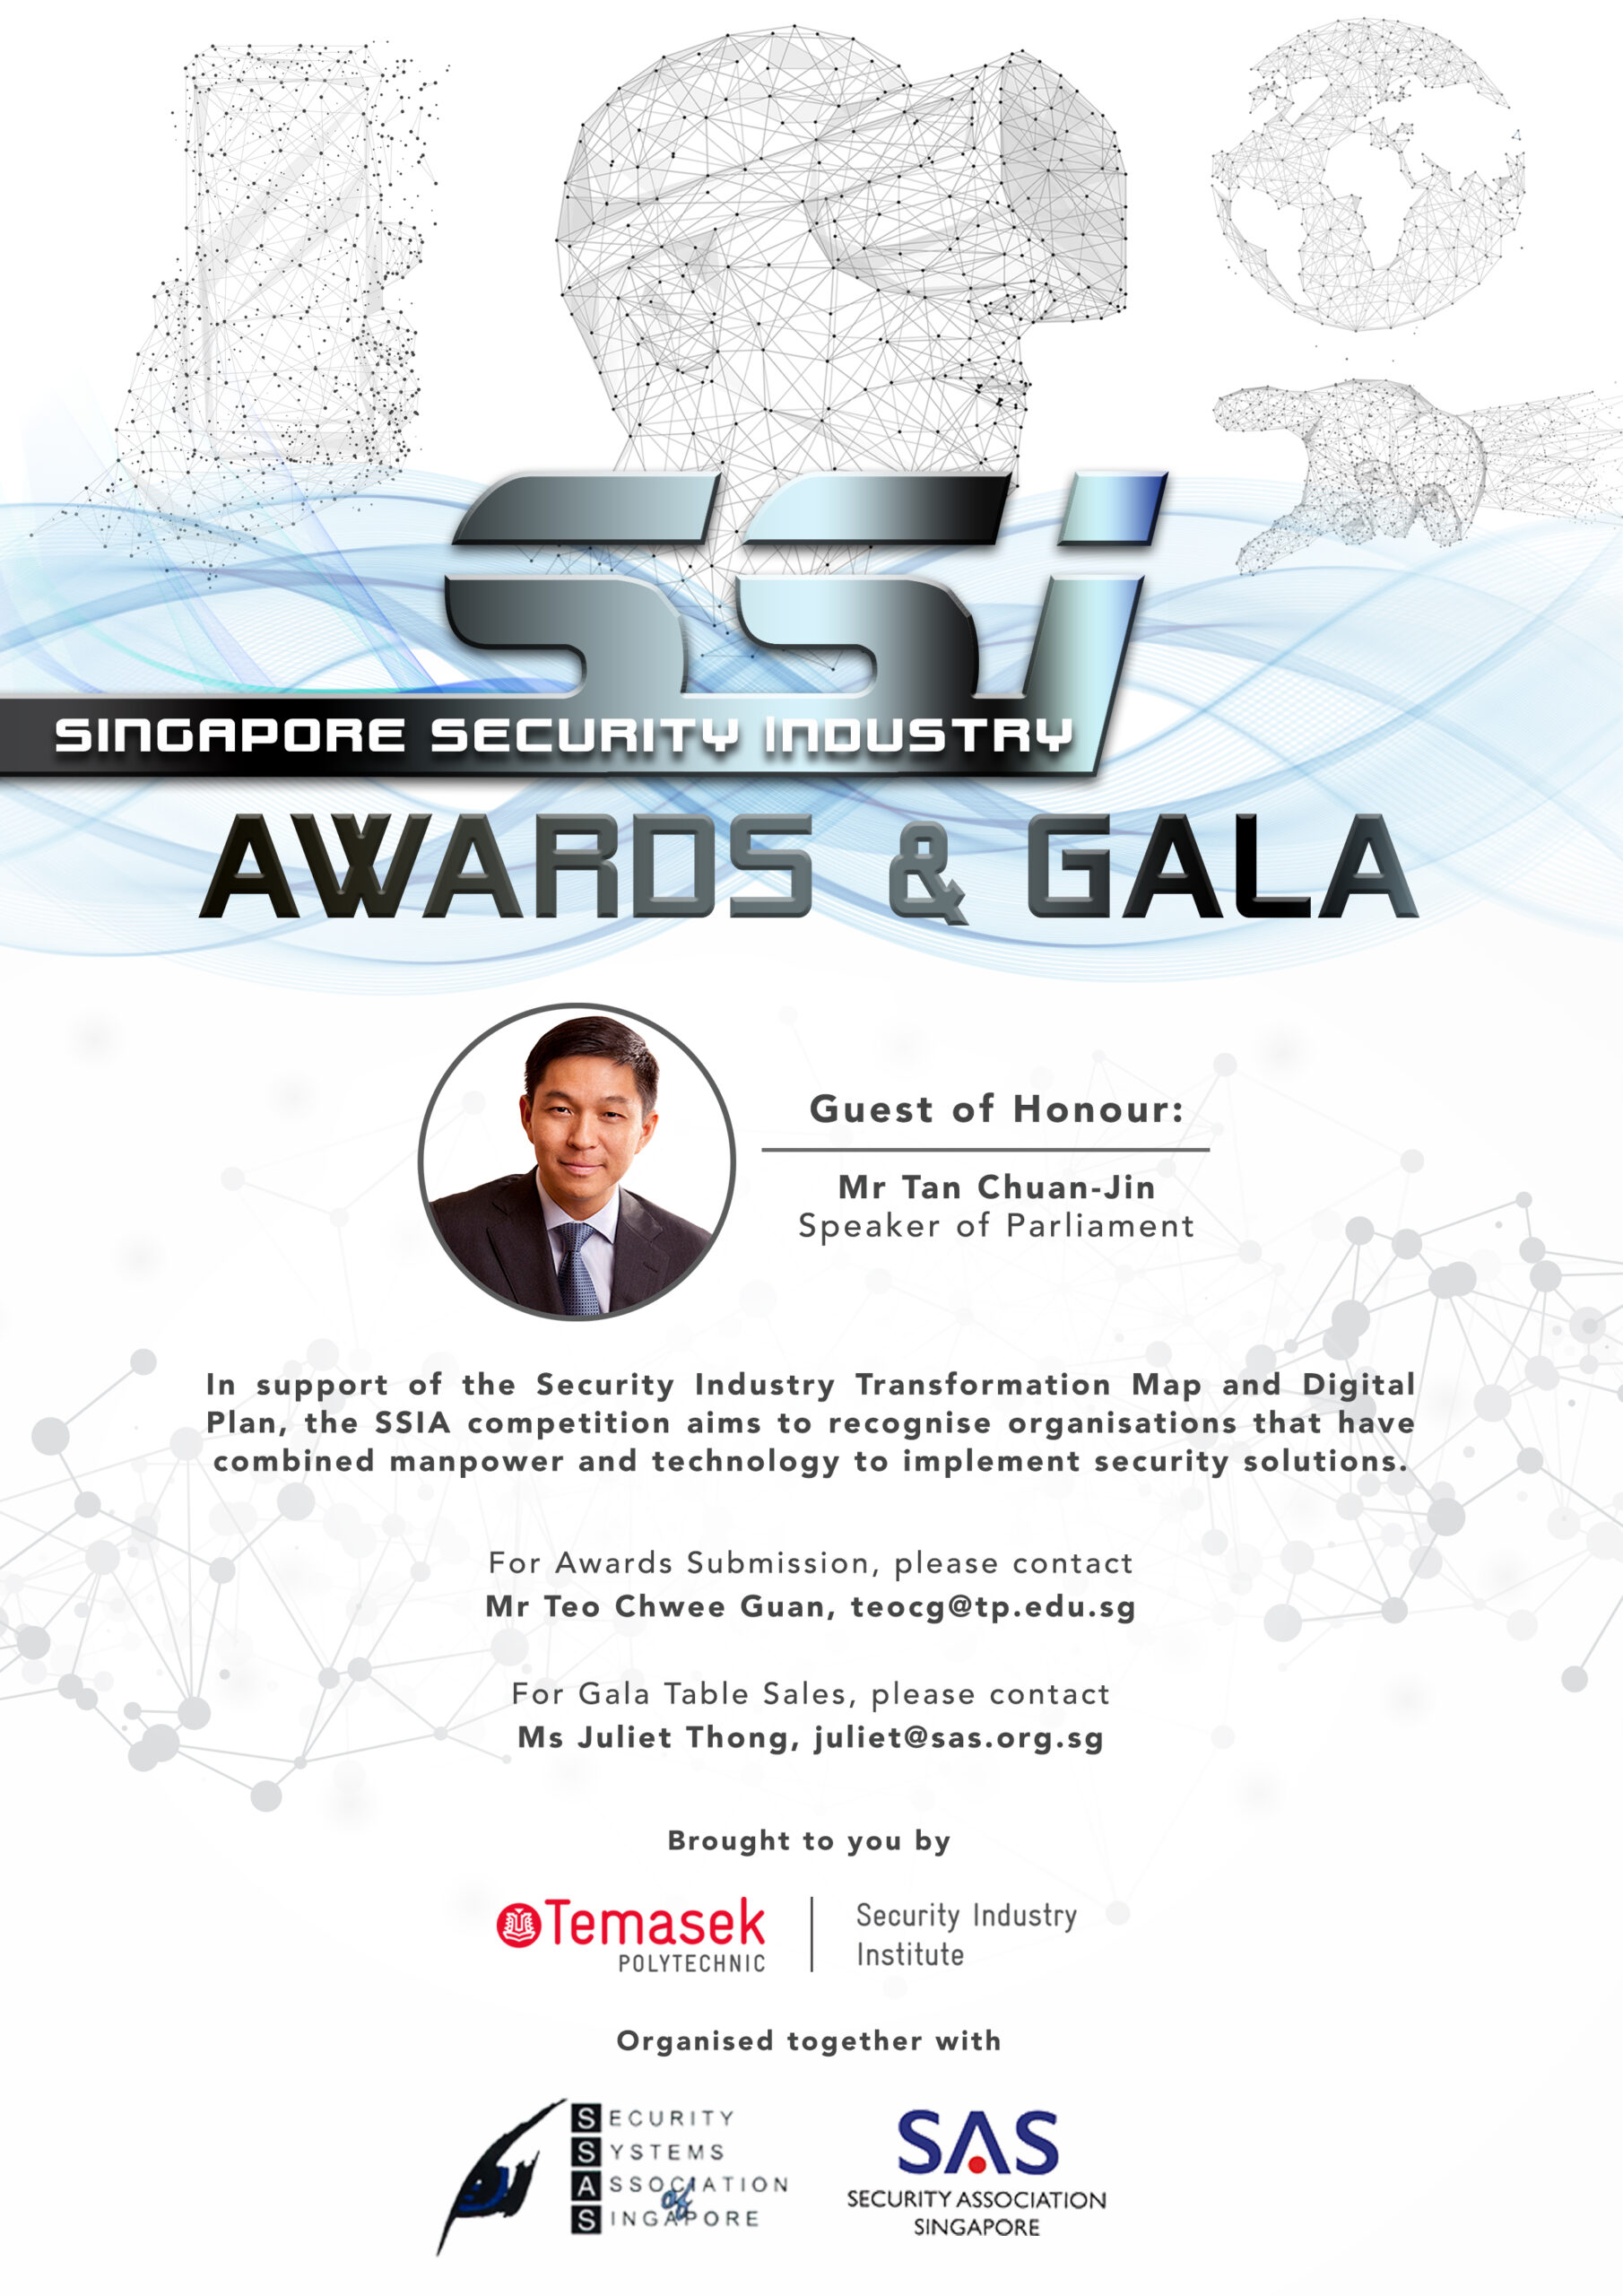 A promotional image for the SSIA 2019 competition, highlighting key dates, eligible participants, evaluation criteria, and the types of awards to be given for innovative security solutions.